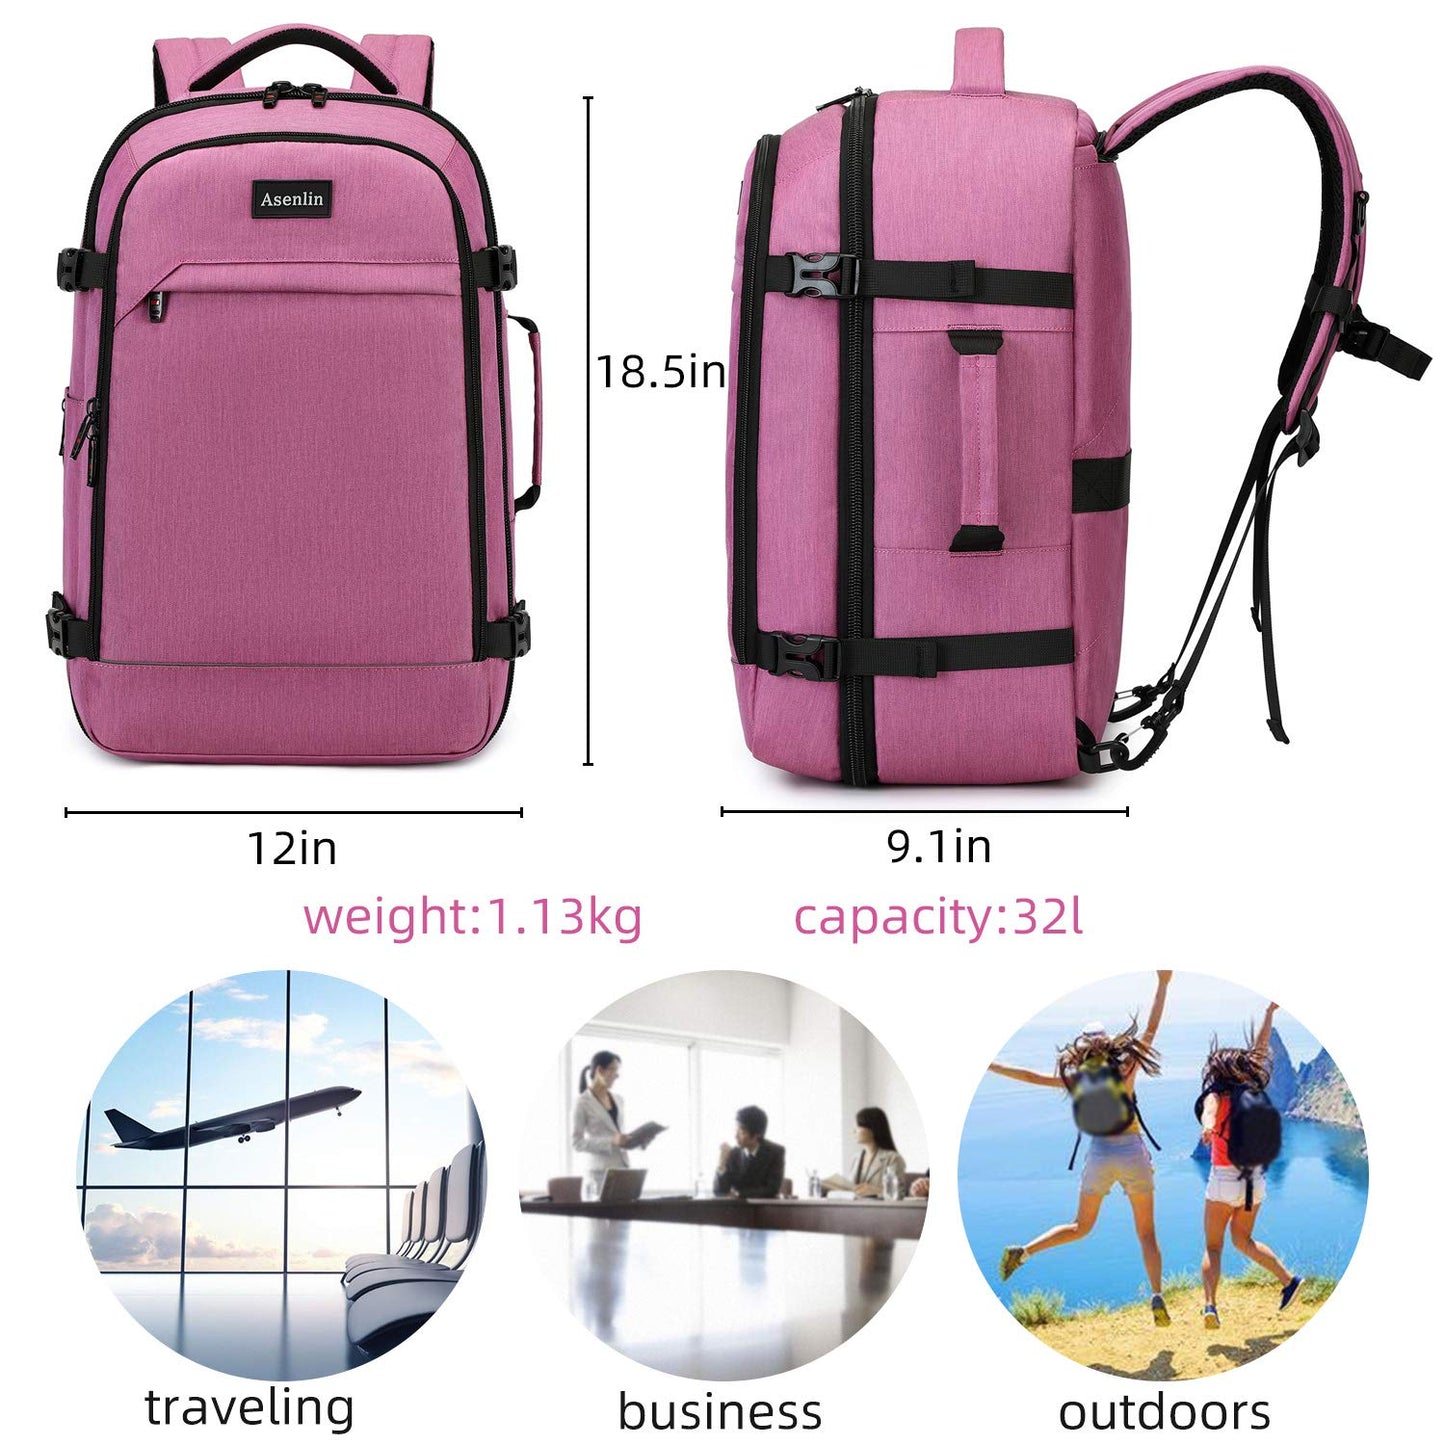 Asenlin 40L Travel Backpack for Women Men，17 Inch Laptop Backpack Flight Approved Luggage Carry On Water Resistant Computer Backpack for Weekender Overnight Large Daypack Pink